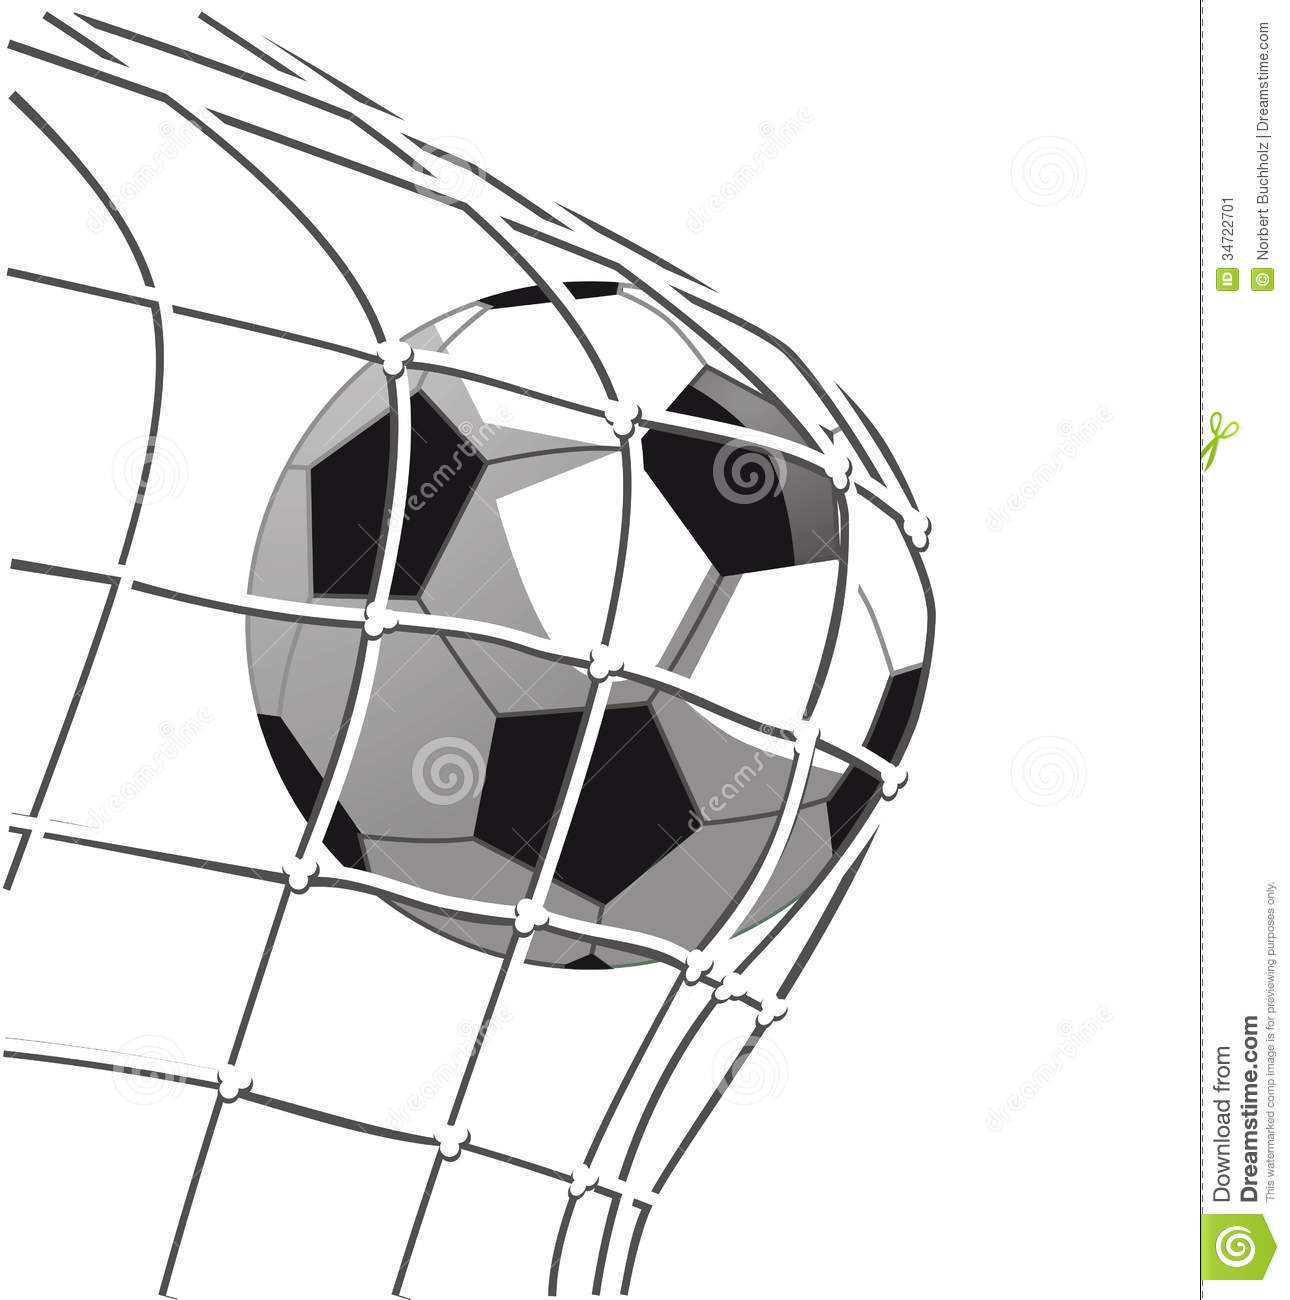 soccer goal clipart black and